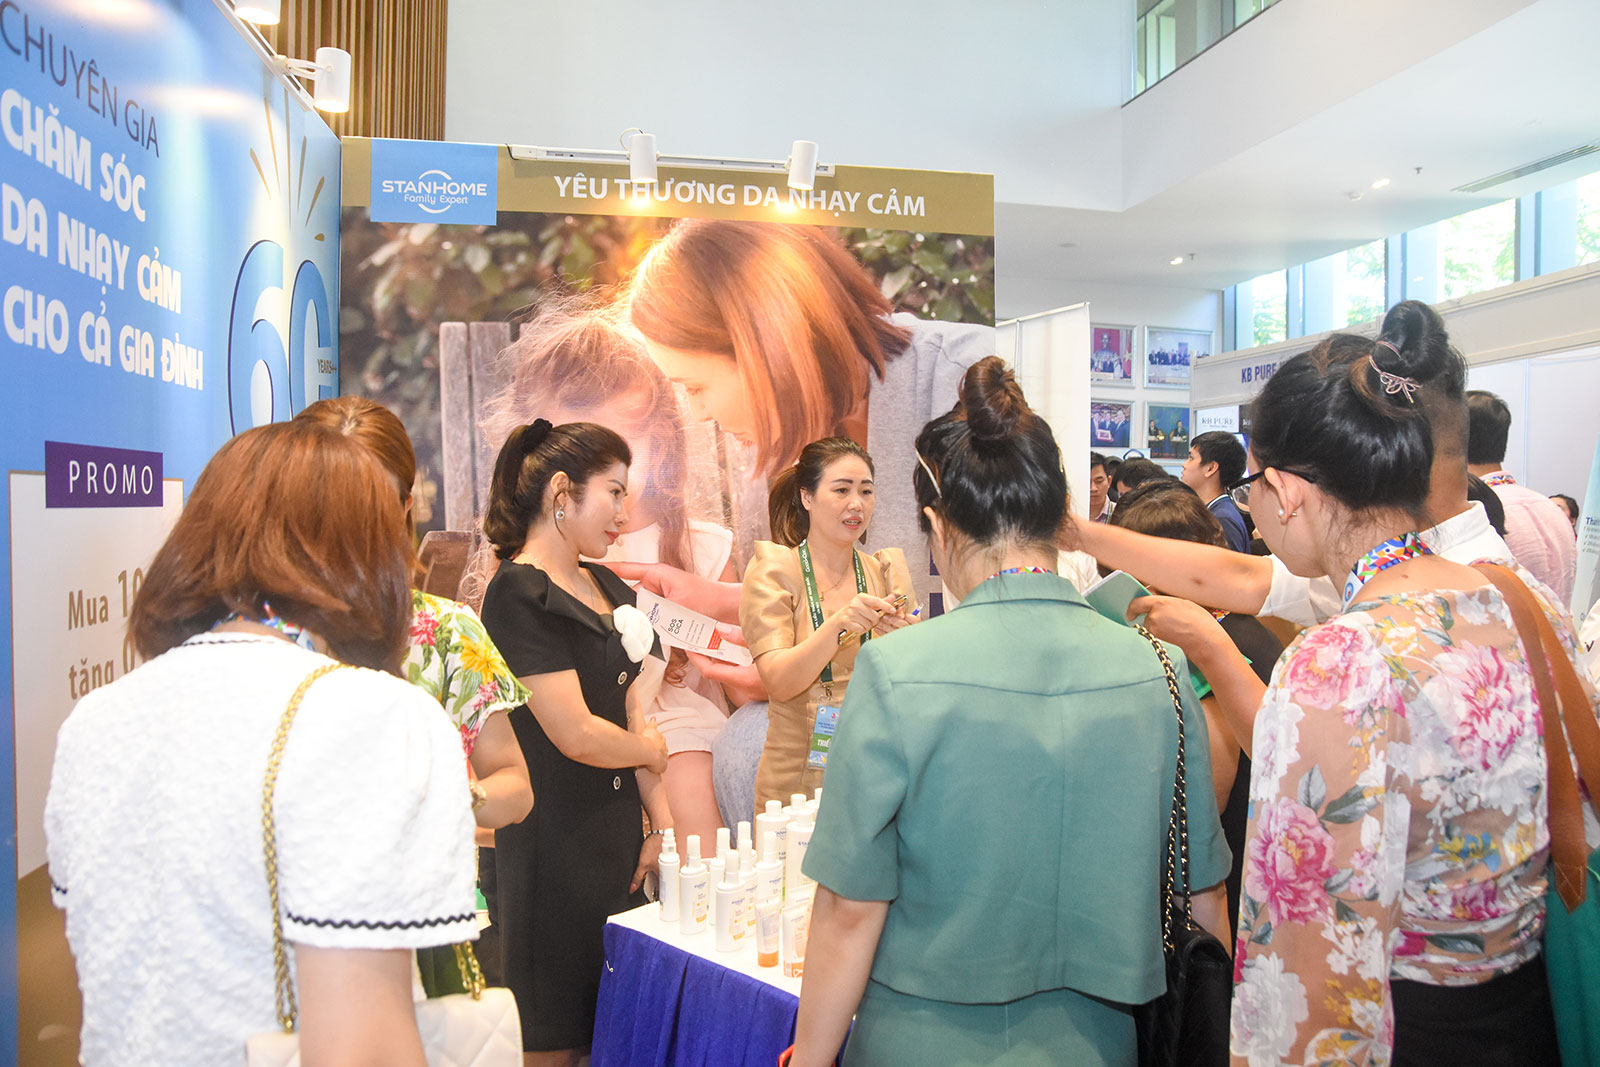 THE 5TH NATIONAL CONGRESS OF AESTHETIC DERMATOLOGY AT ARIYANA CONVENTION CENTRE DANANG